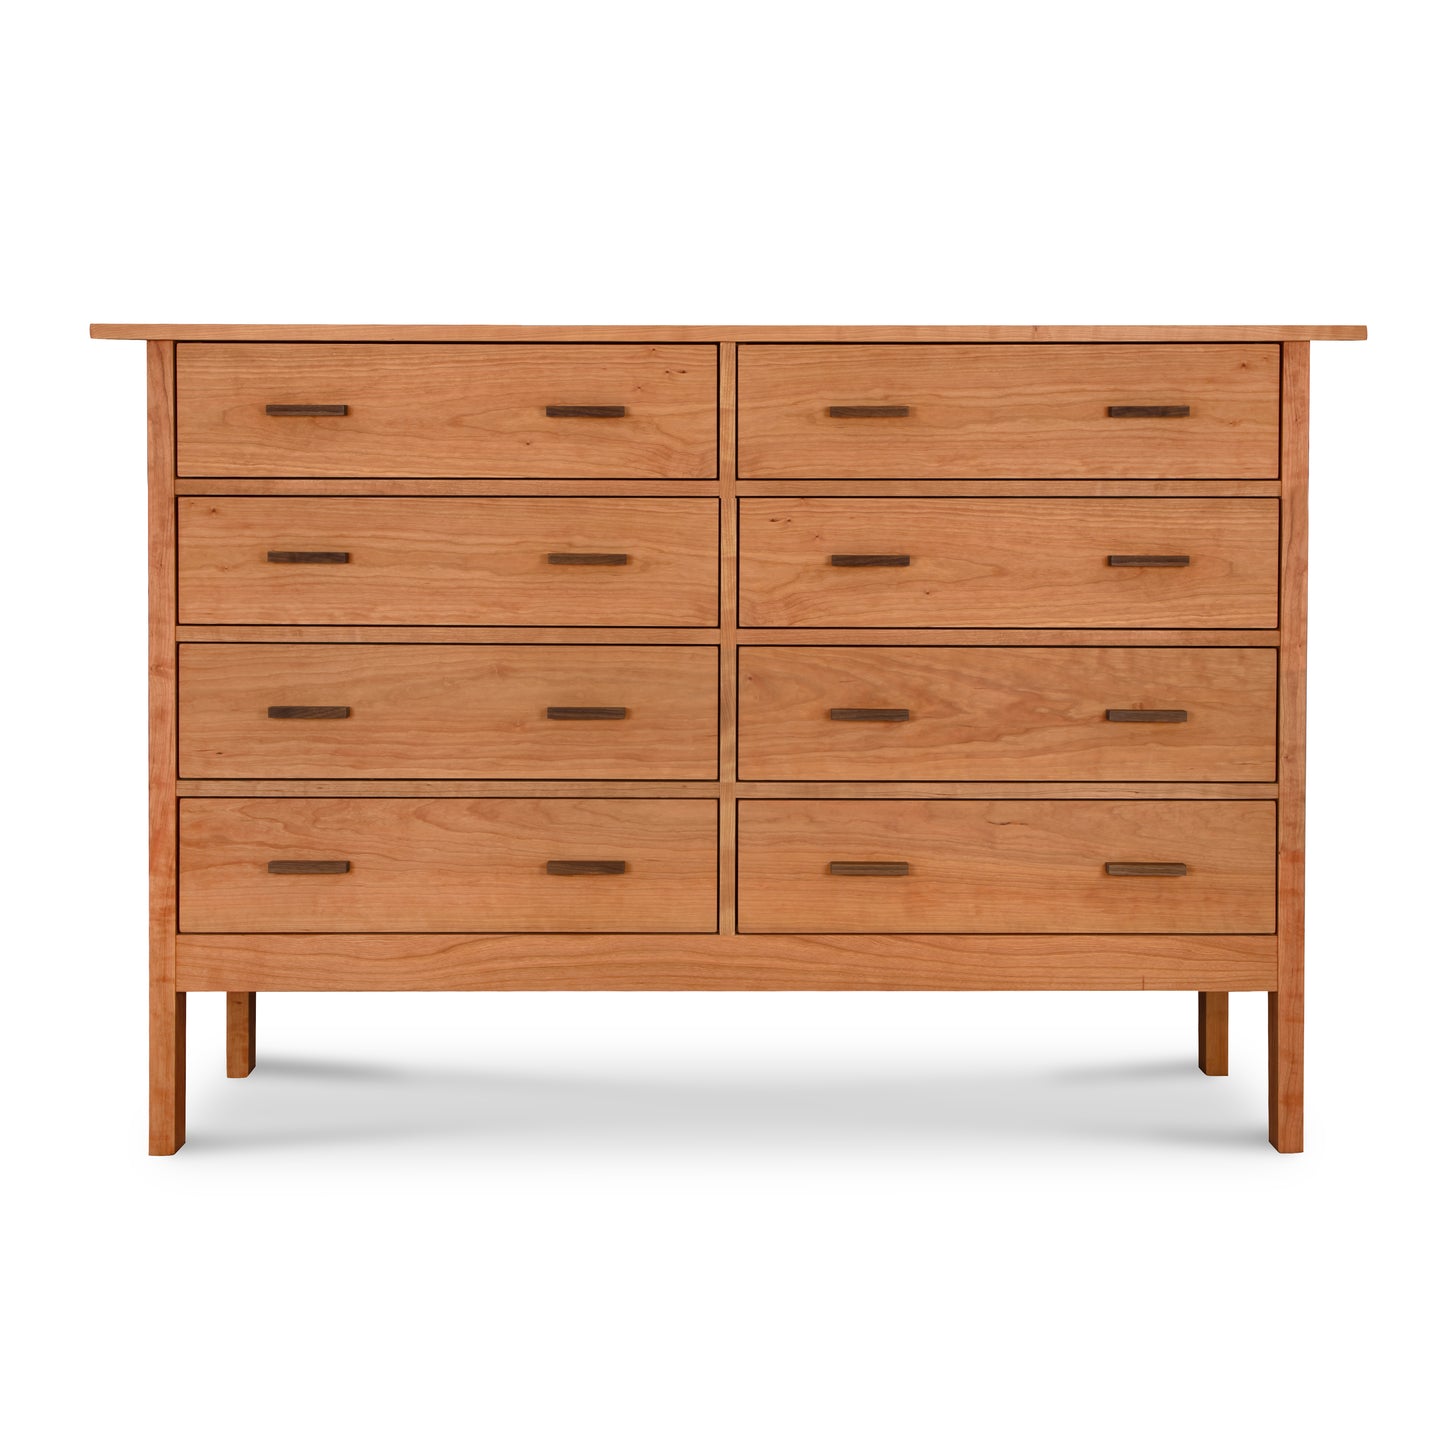 A Vermont Furniture Designs Modern Craftsman 8-Drawer Dresser with multiple drawers against a white background.